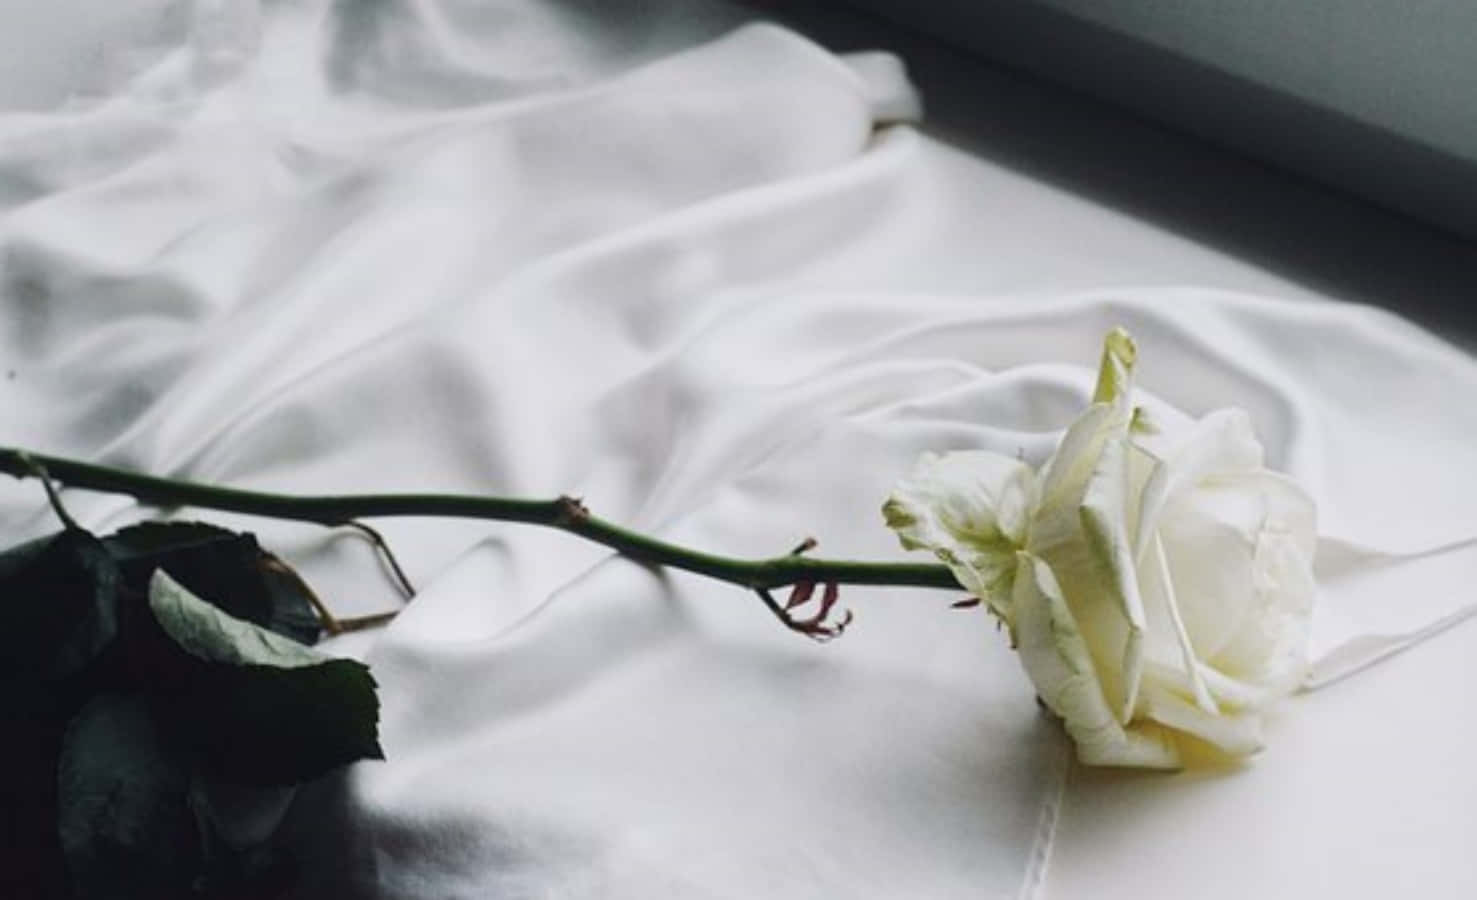 A White Rose - A Symbol of Purity and Innocence